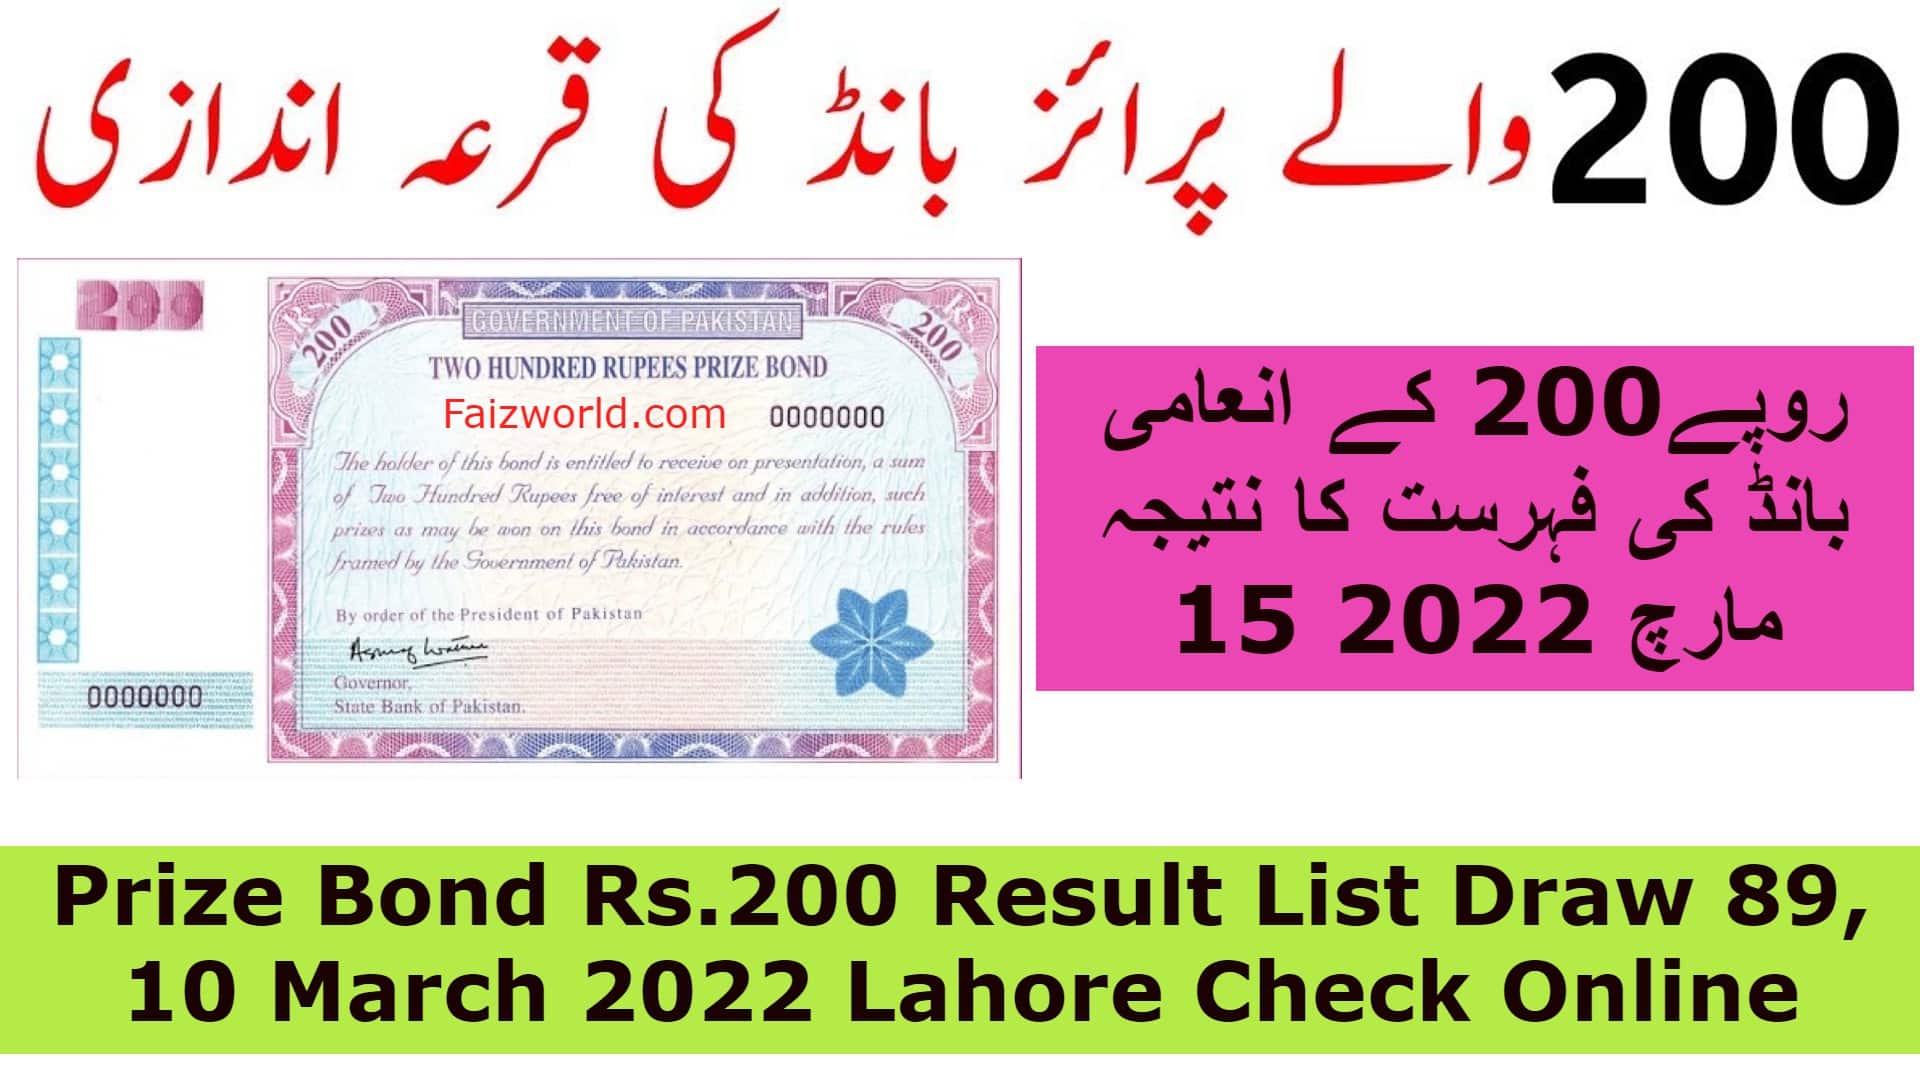 Prize Bond Rs.200 Result List Draw 89, 10 March 2022 Lahore Check Online